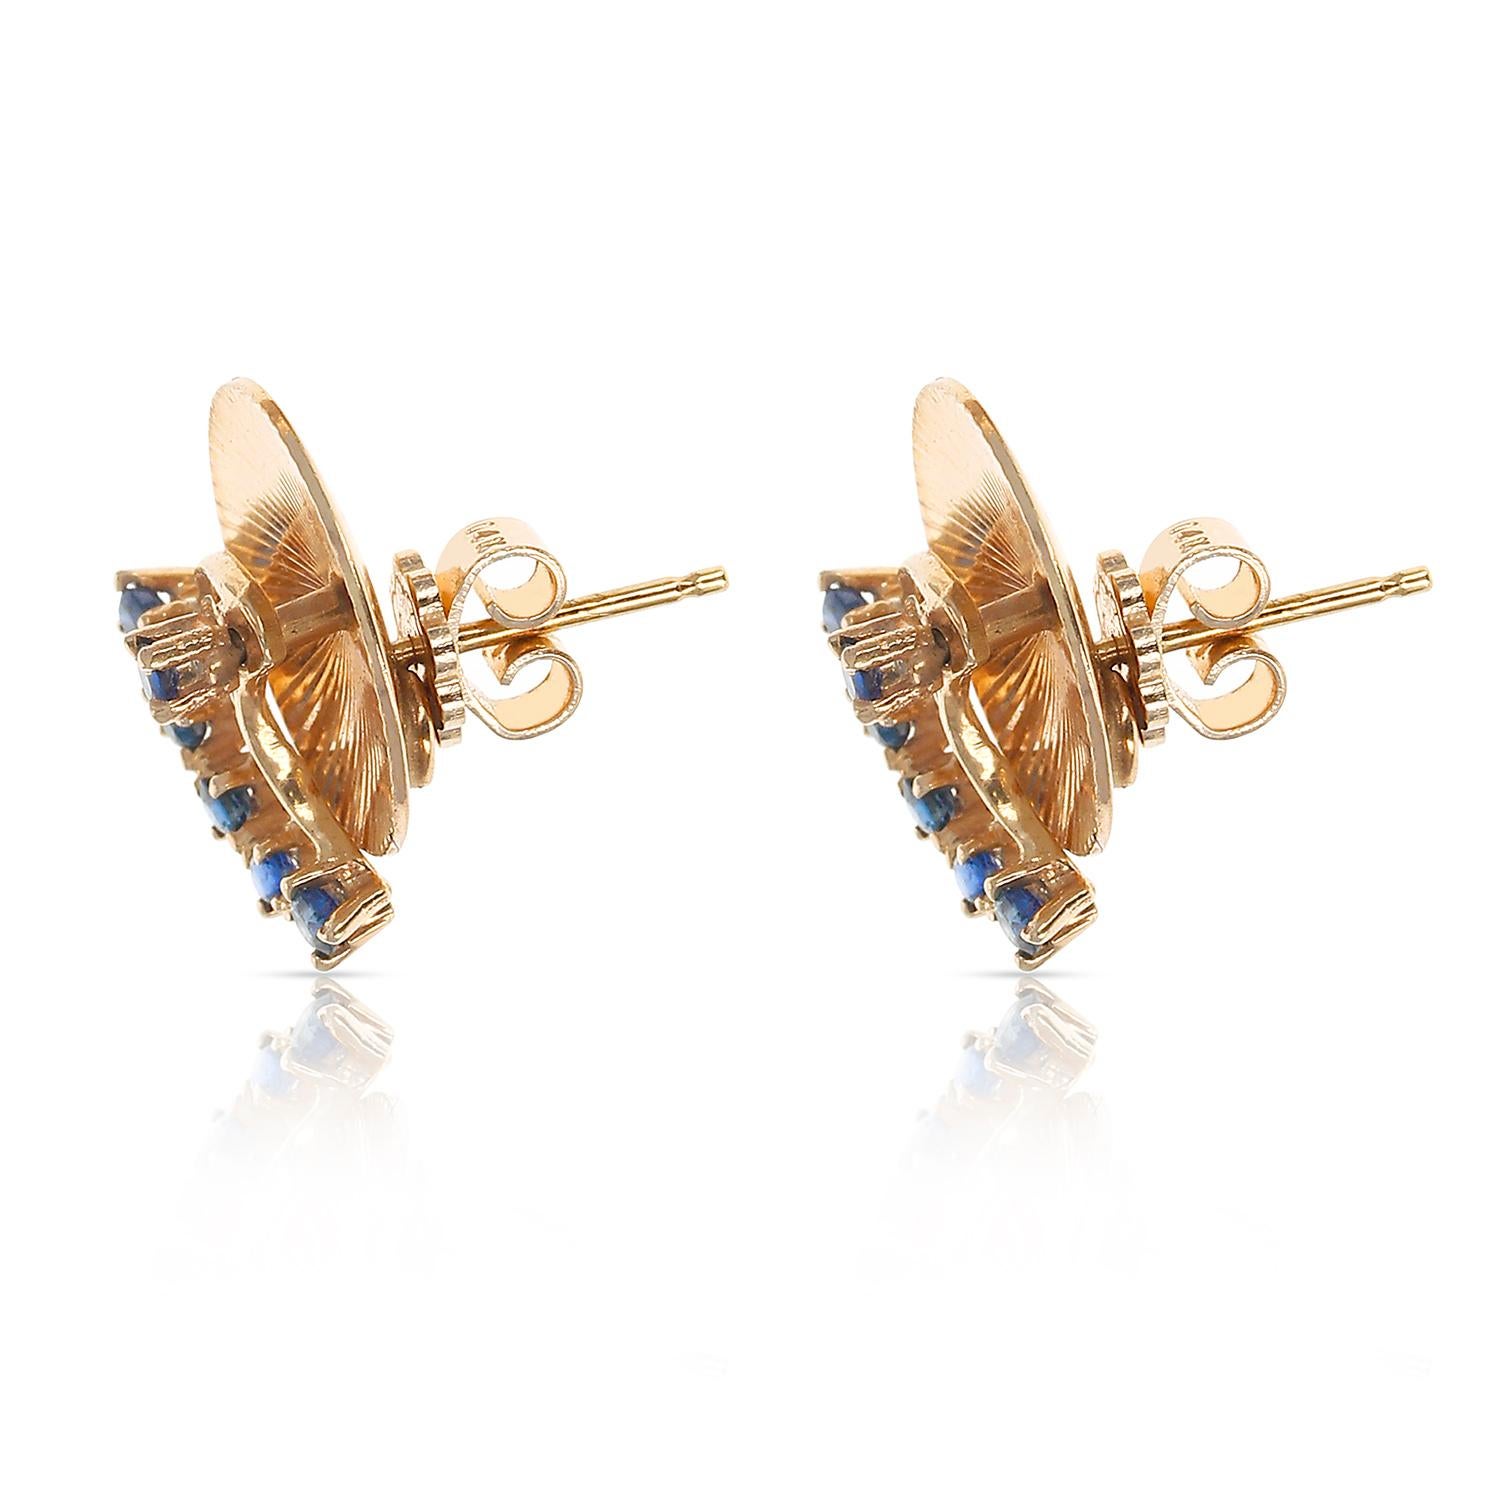 A pair of Tiffany & Co. Spinning Blue Sapphire Earrings made in 14 Karat Yellow Gold.  The total weight is 6.40 grams. 
Length: 1.80